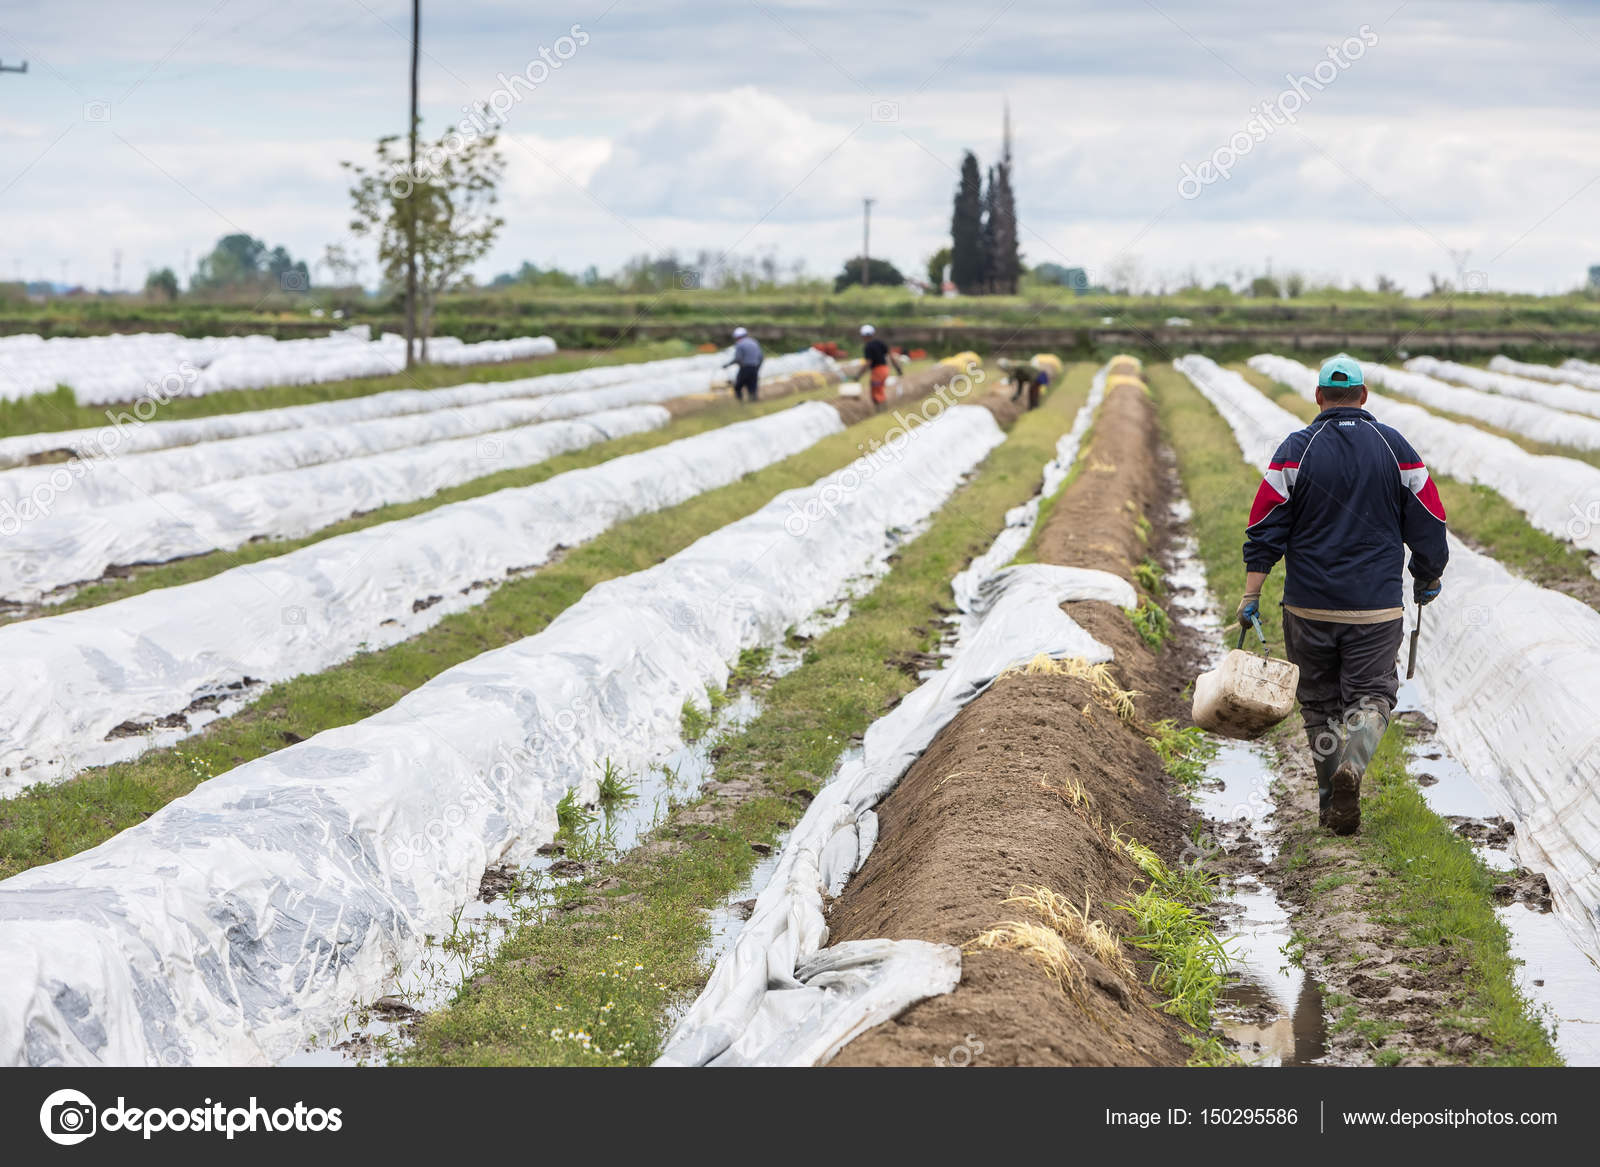 Workers In The Farm During Harvesting White Asparagus Stock Editorial Photo C Vverve 150295586,Transplanting Yucca